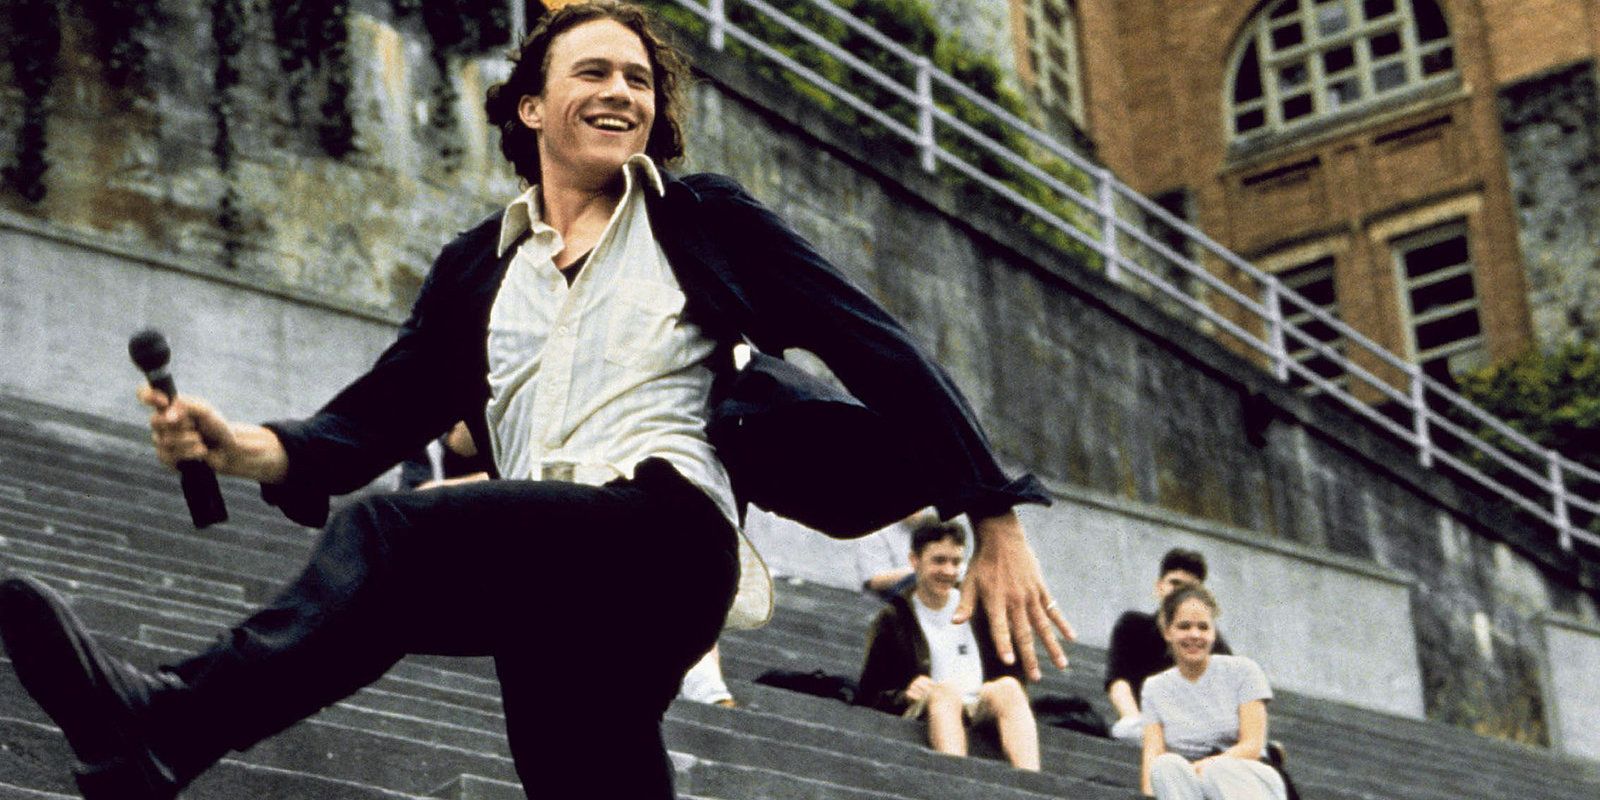 Heath Ledger as Patrick Verona dancing on steps in 10 Things I Hate About You